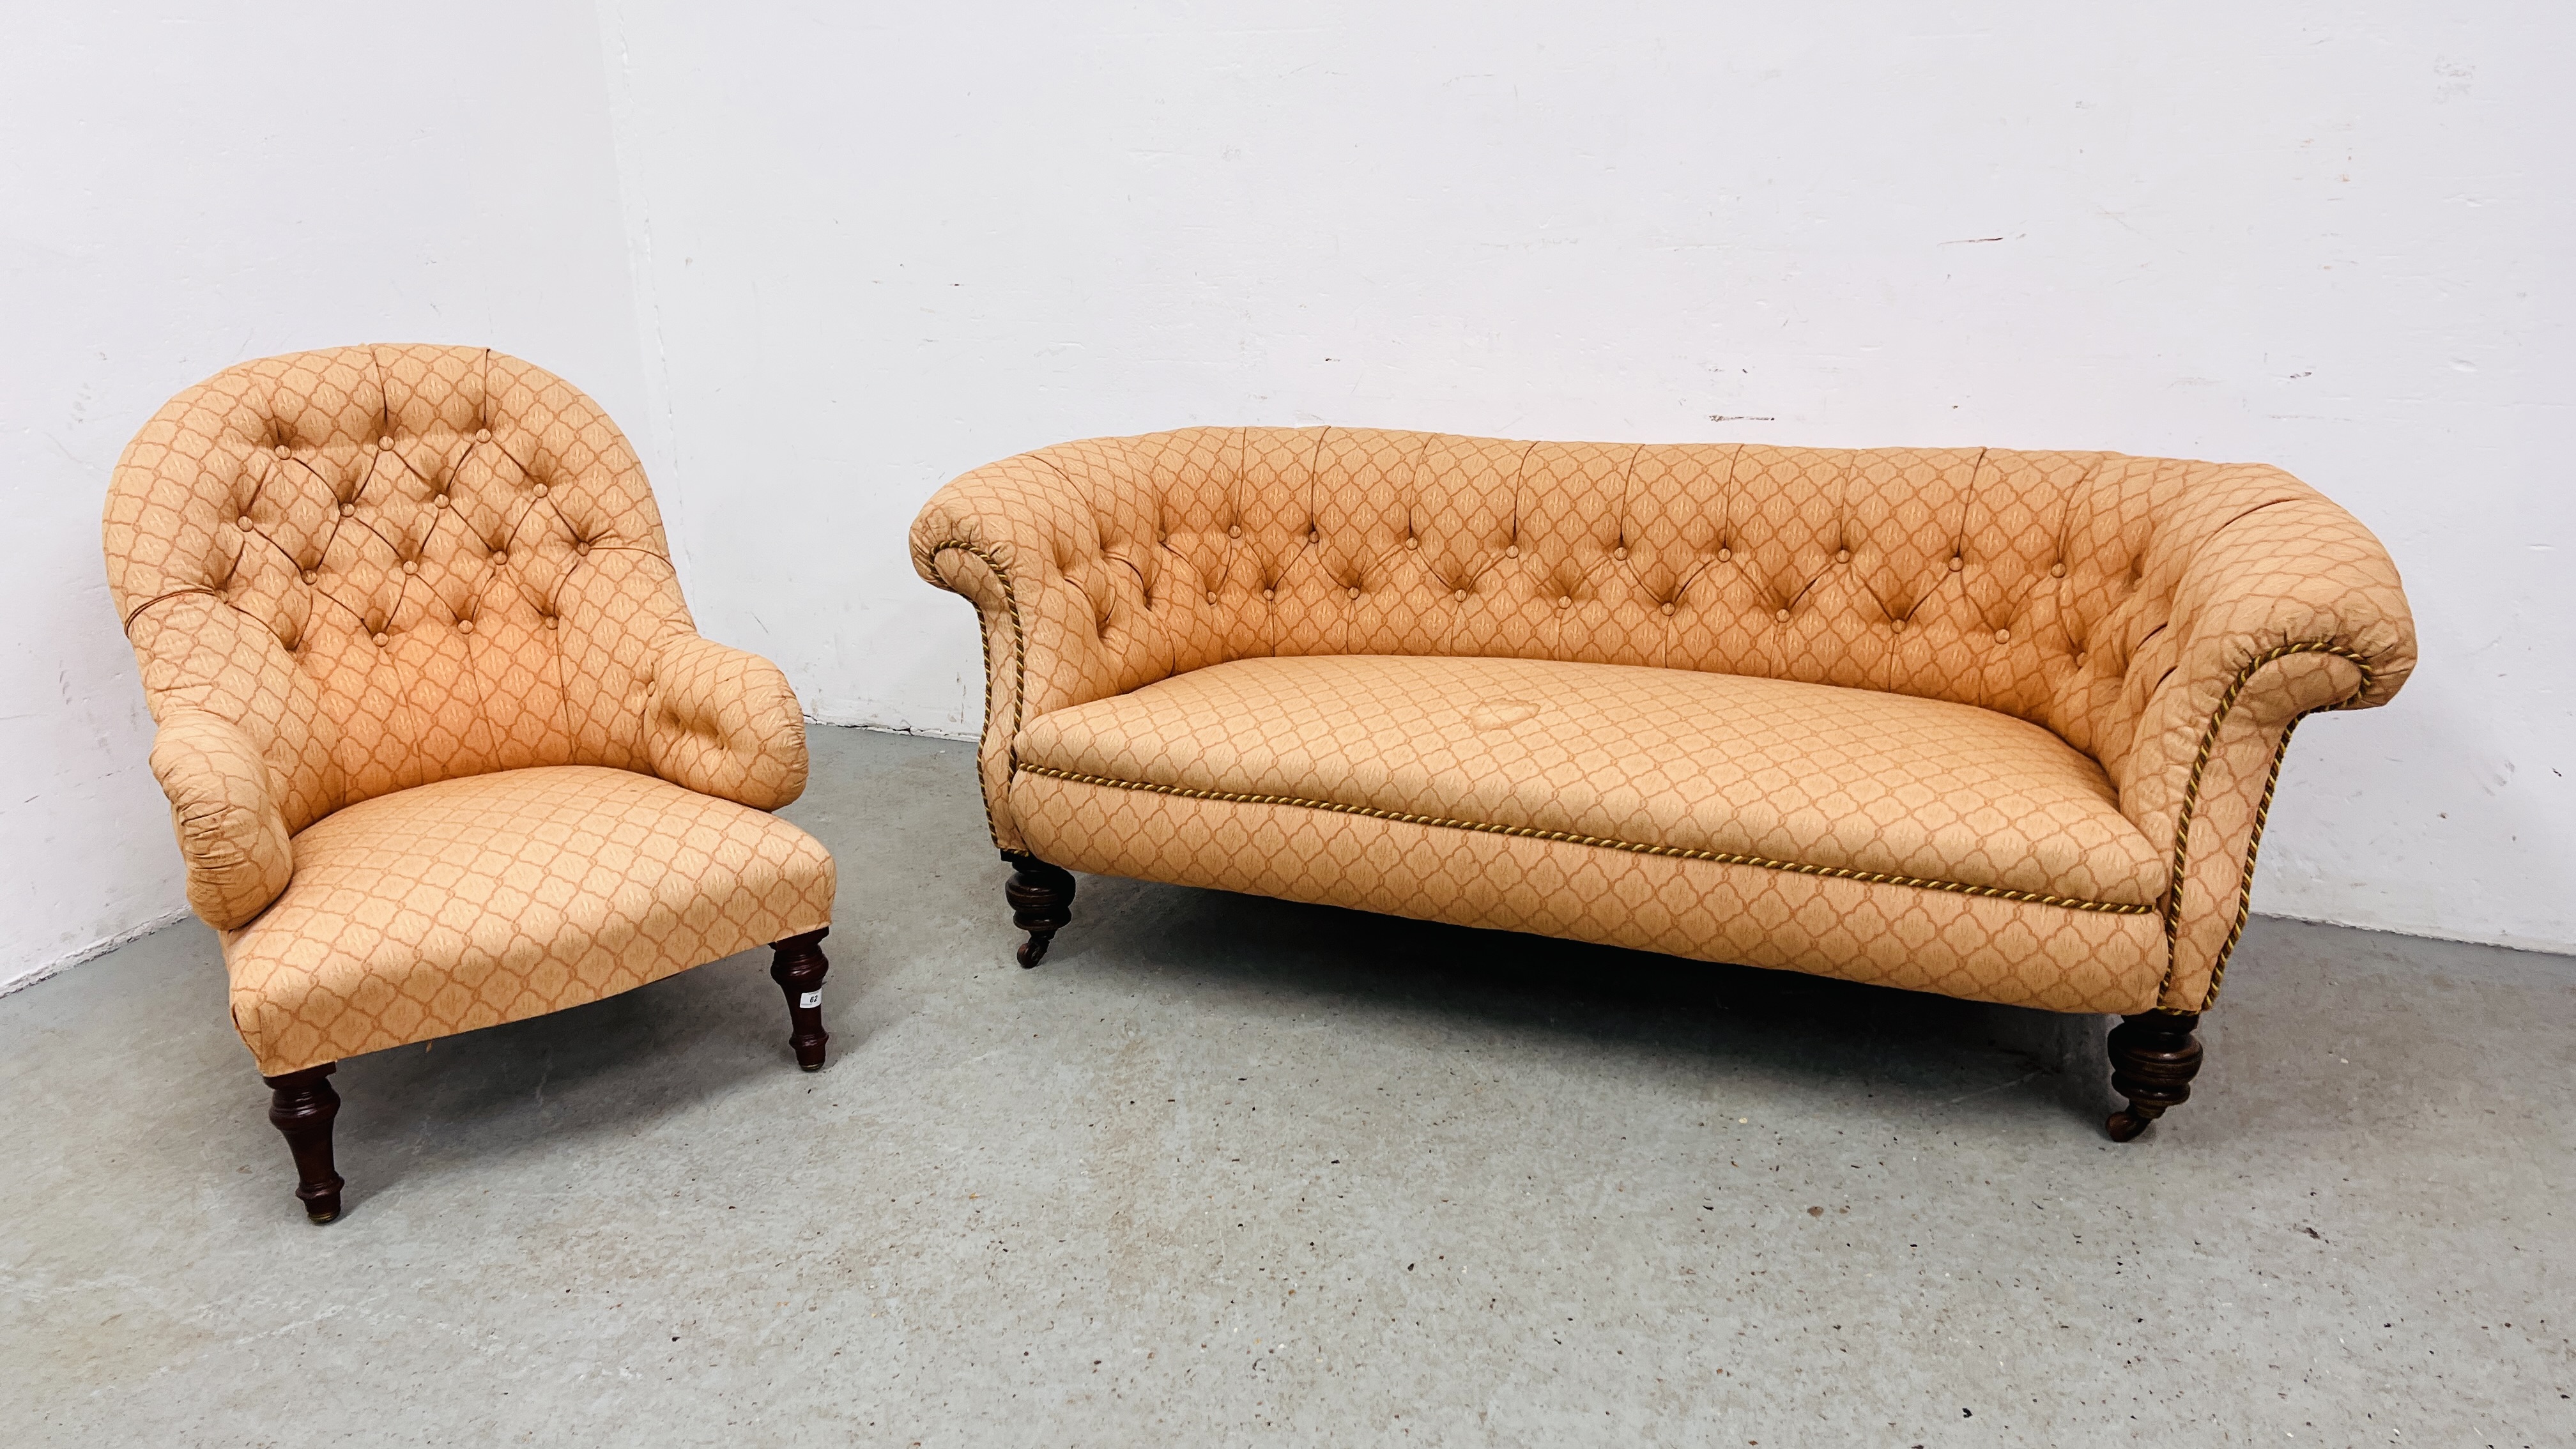 A VICTORIAN BUTTON BACK SOFA AND A LADY'S ARMCHAIR COVERED IN A SIMILAR FABRIC.